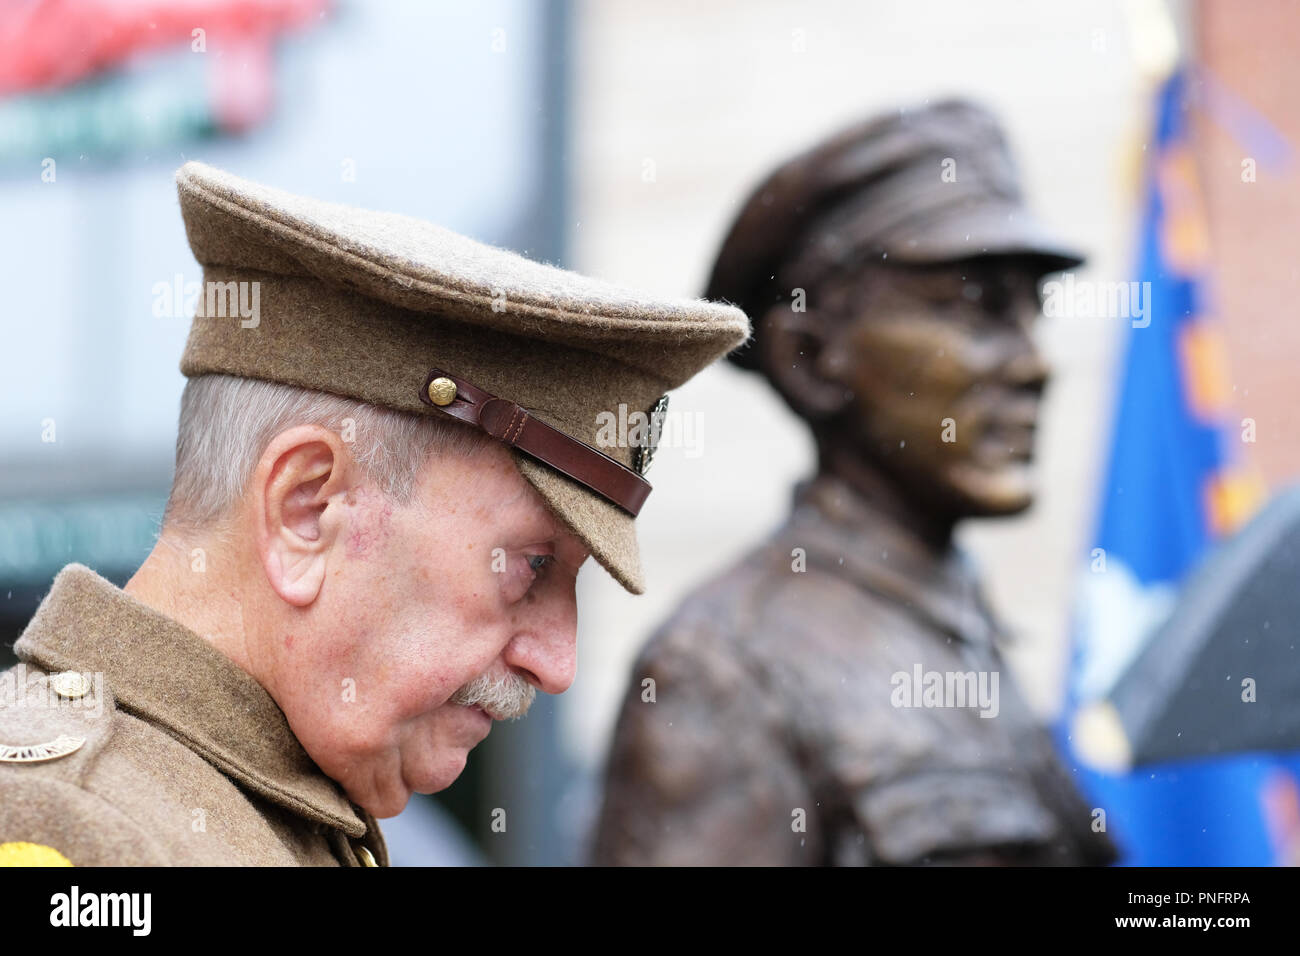 Hereford, Herefordshire, UK - Friday 21st September 2018 - Guard of Honour for the statue of Lance Corporal Allan Leonard Lewis VC unveiled today in Hereford - L/Cpl Allan Lewis VC was awarded the Victoria Cross posthumously ( aged 23 years ) for his 'most conspicuous bravery' during the Battle of Epehy in Northern France along the Hidenburg Line  - he was killed in action exactly 100 years to the day on 21st September 1918 and is the only soldier born in Herefordshire to win the VC . Photo Steven May / Alamy Live News Stock Photo